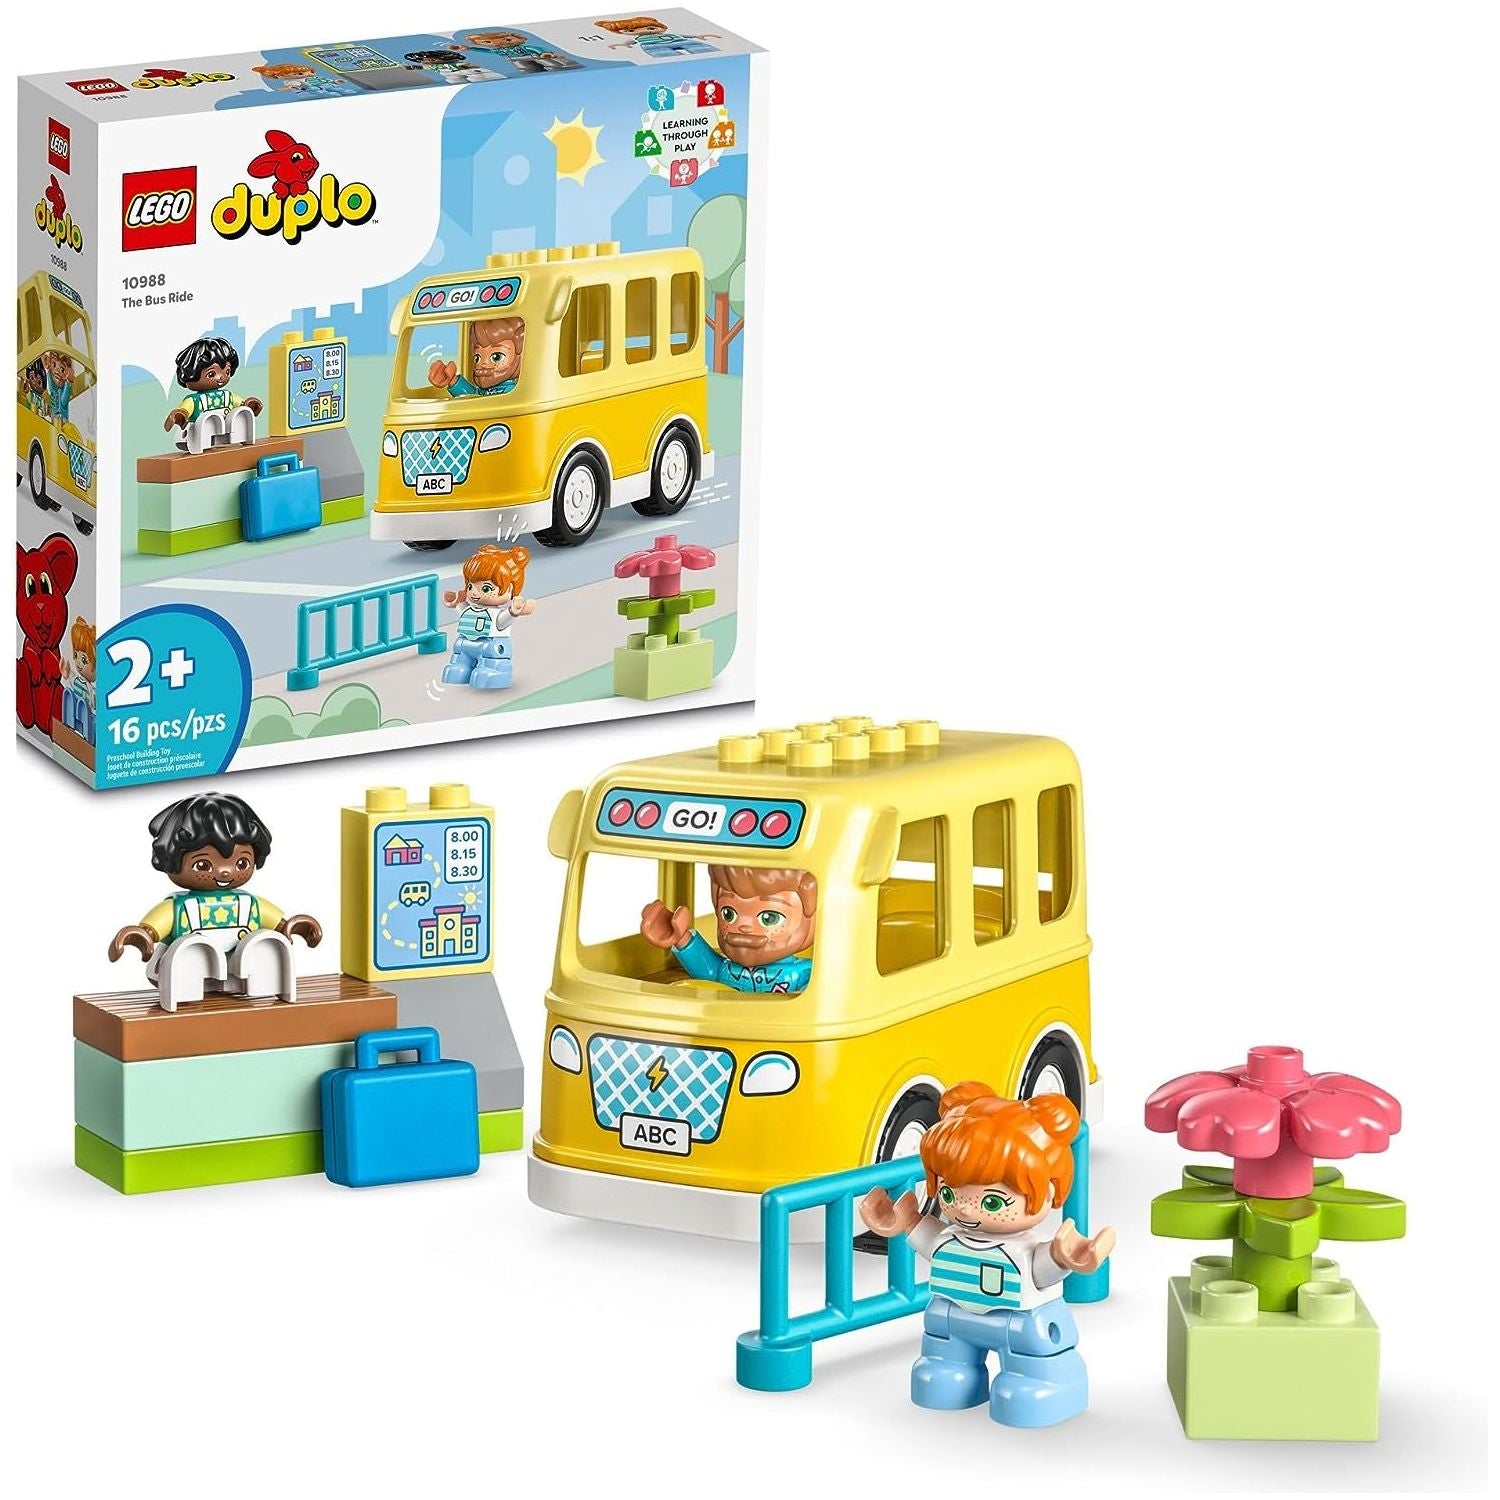 LEGO 10988  DUPLO Town Bus Ride Educational STEM Building Toy Set for Preschool Kids Hands on Learning About Catching The Bus to Day Care and Making Friends